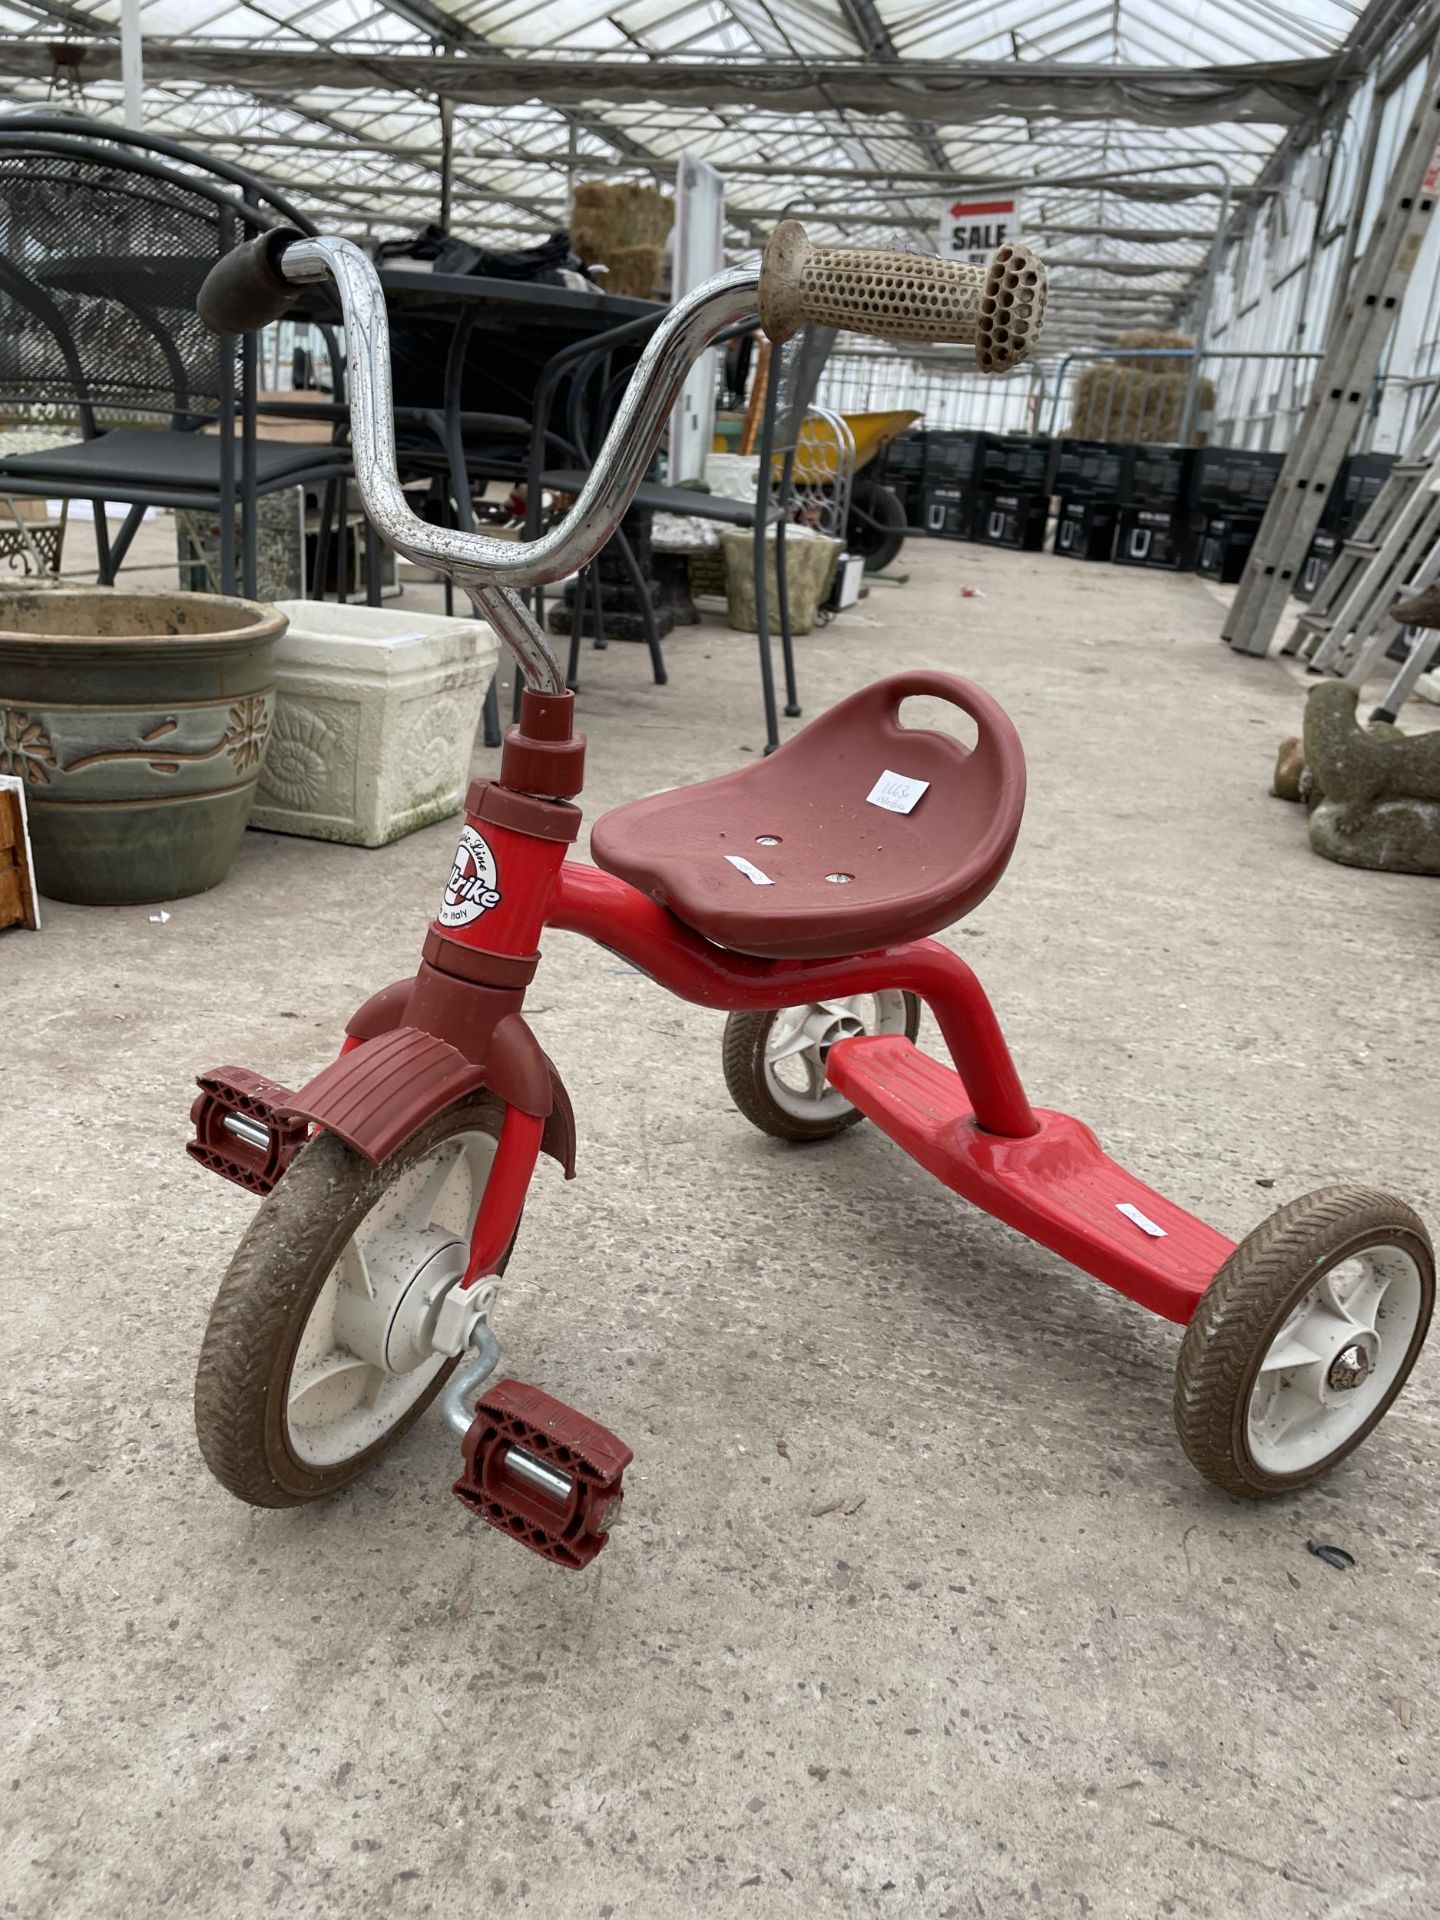 A VINTAGE CHILDS 'ITALTRIKE' TRICYCLE - Image 2 of 3